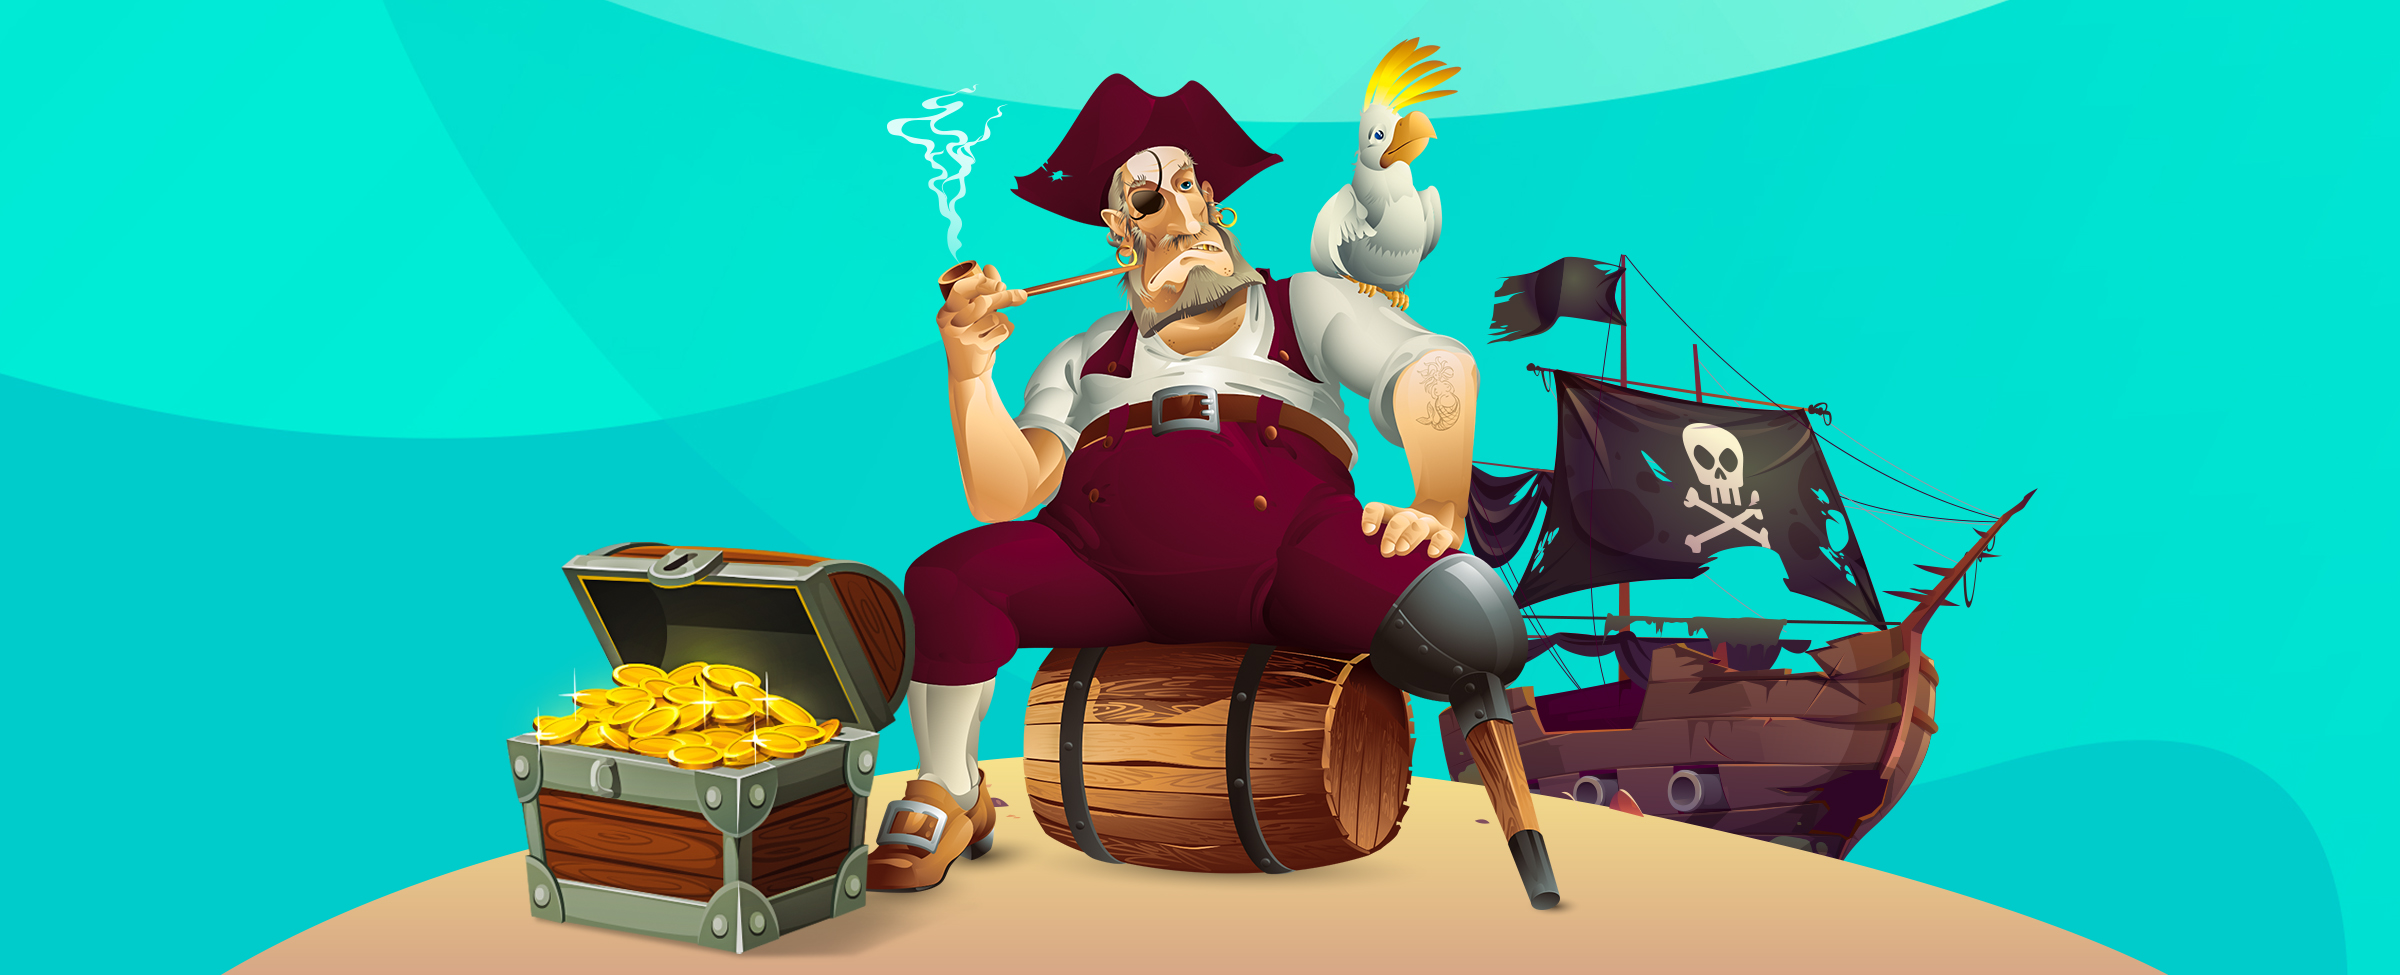 A 3D-animated pirate sitting on a wooden barrel wedged in sand, legs sprawled, and smoking a pipe. With one wooden leg, an eye patch, and red trousers and hat, he looks towards the parrot that sits on his left shoulder. Off in the distance is a pirate ship with black sales featuring a skull and bones. To the pirate’s left, is a treasure chest with its lid open, filled with gold.